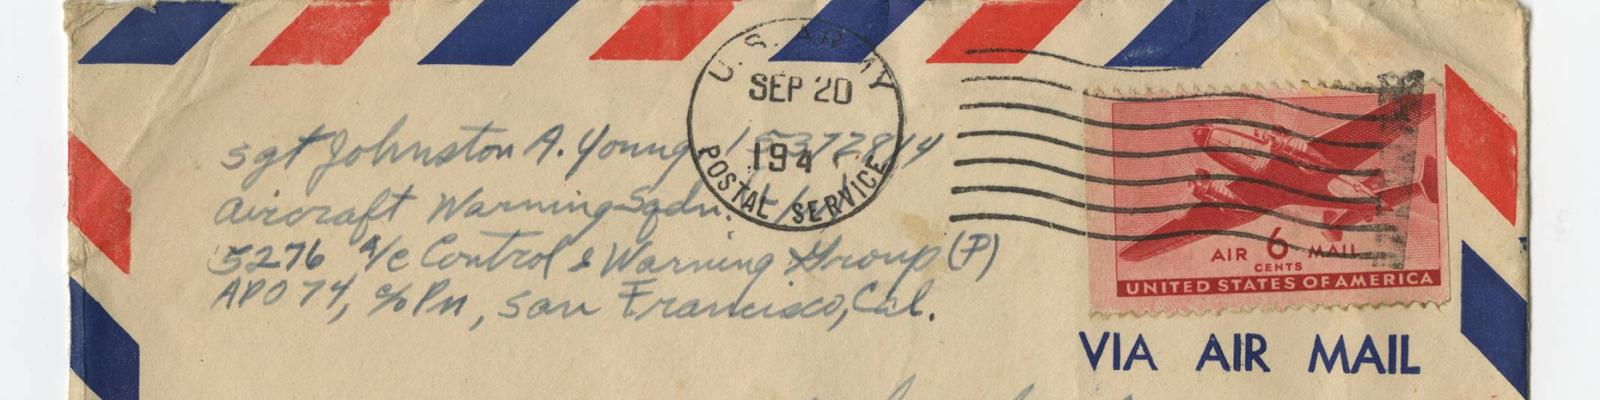 envelope addressed from Sgt Johnston A Young